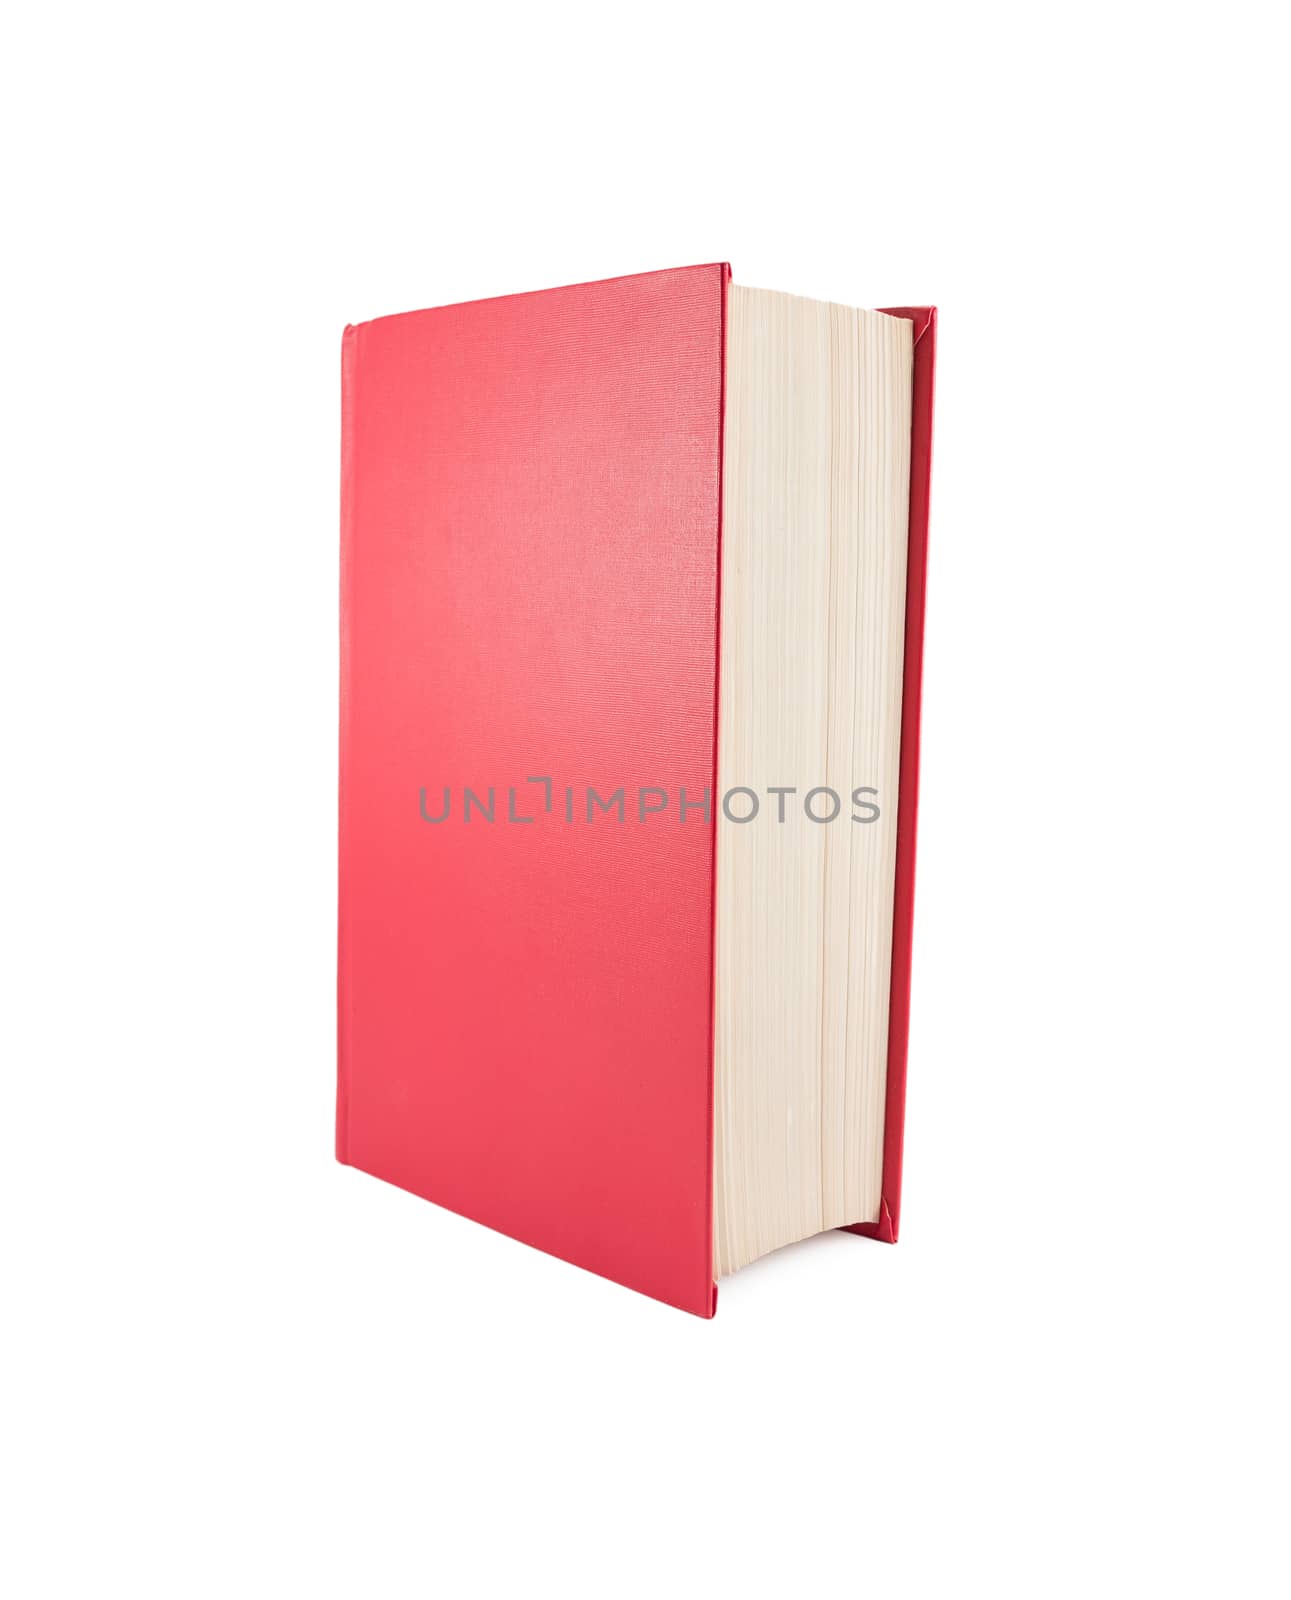 The red book isolated on a white background